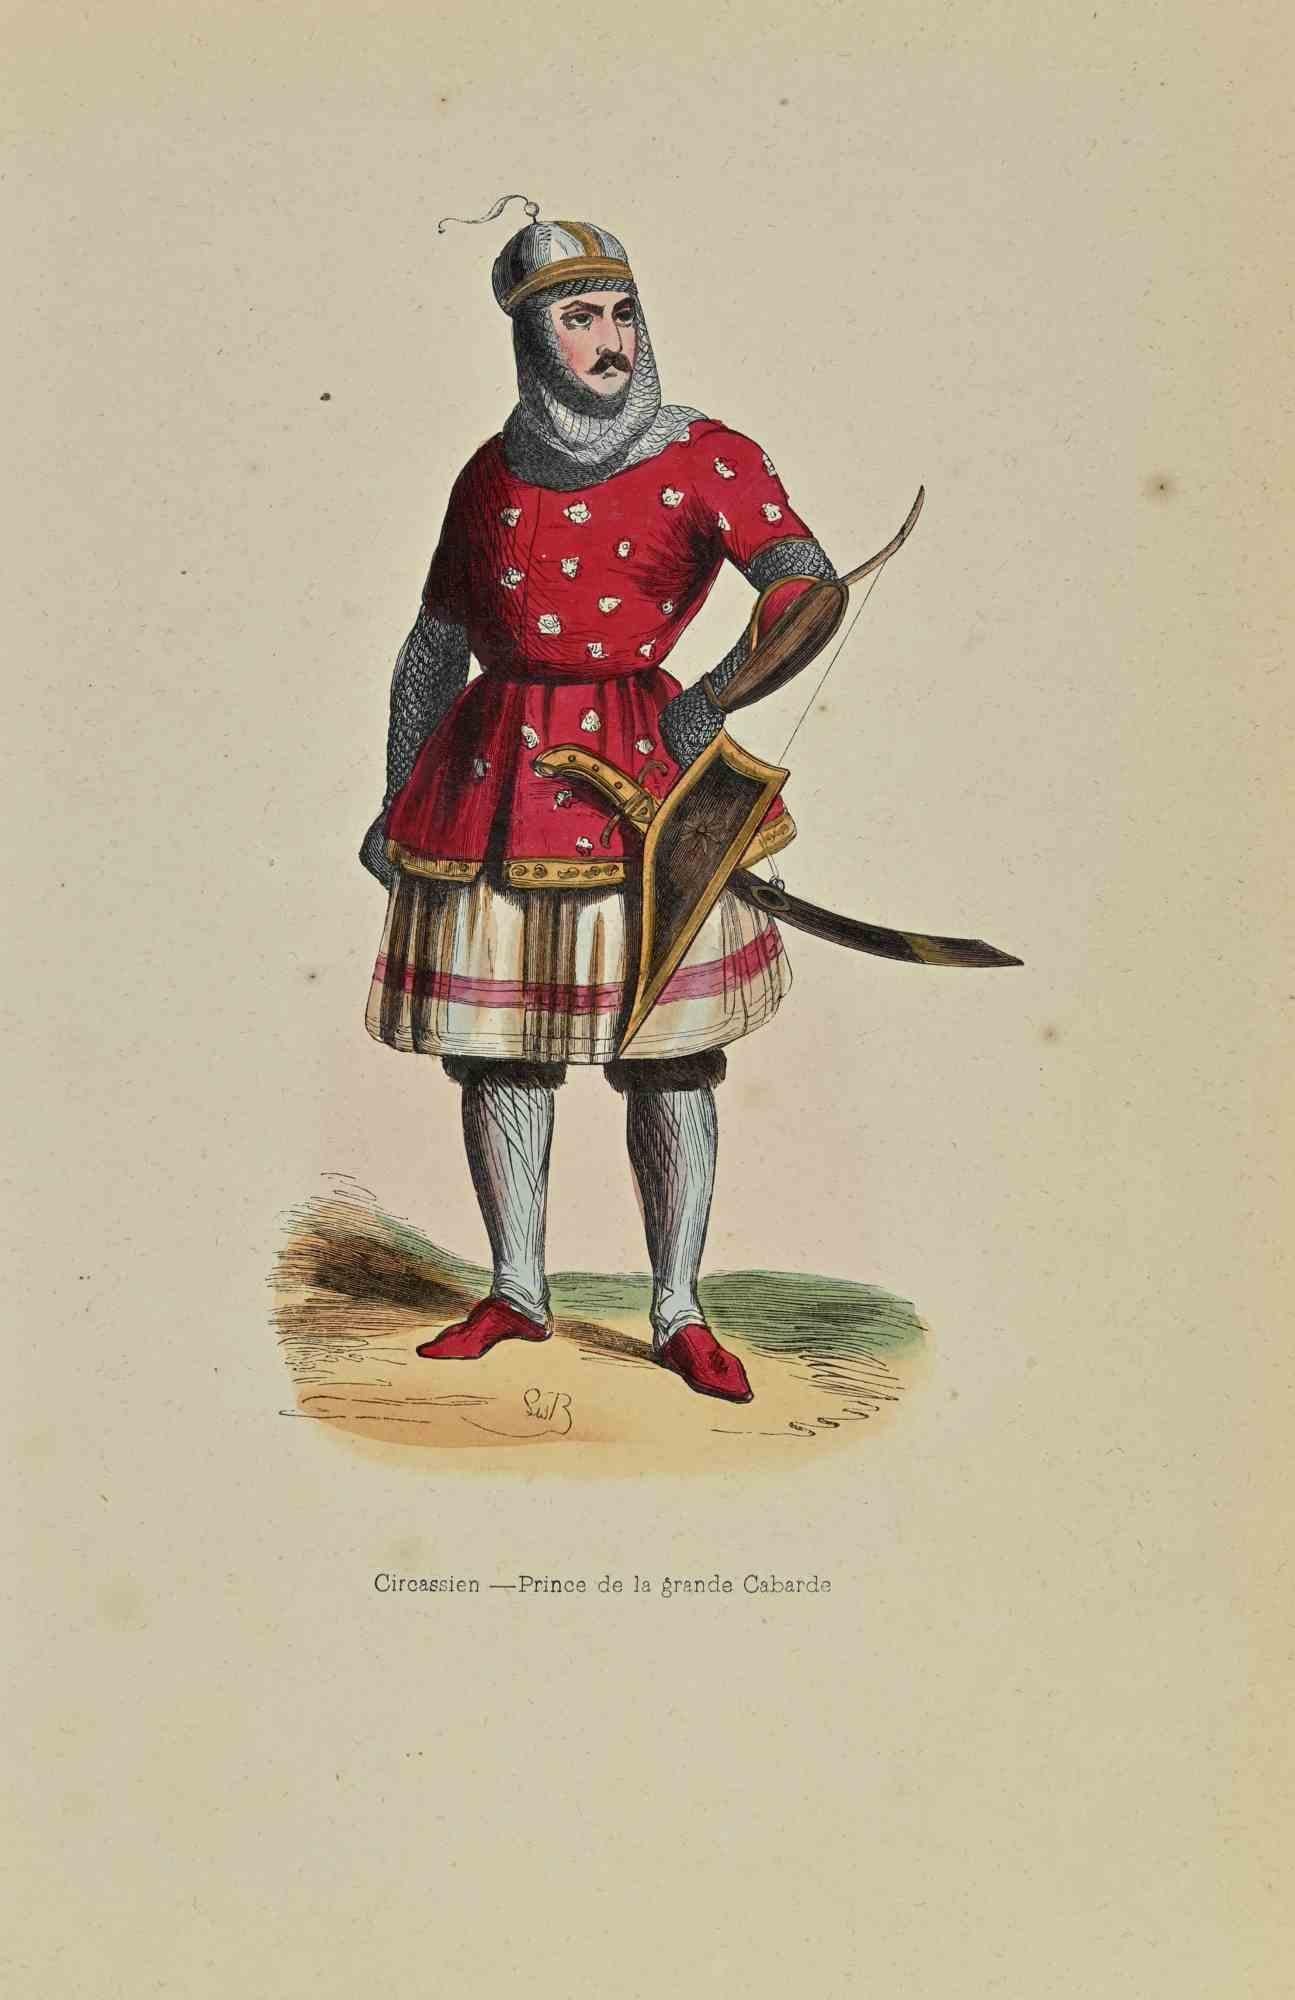 Circus, Prince of the Great Cabarde is a lithograph made by Auguste Wahlen in 1844.

Hand colored.

Good condition.

At the center of the artwork is the original title "Circassien , Prince de la grande Cabarde".

The work is part of Suite Moeurs,